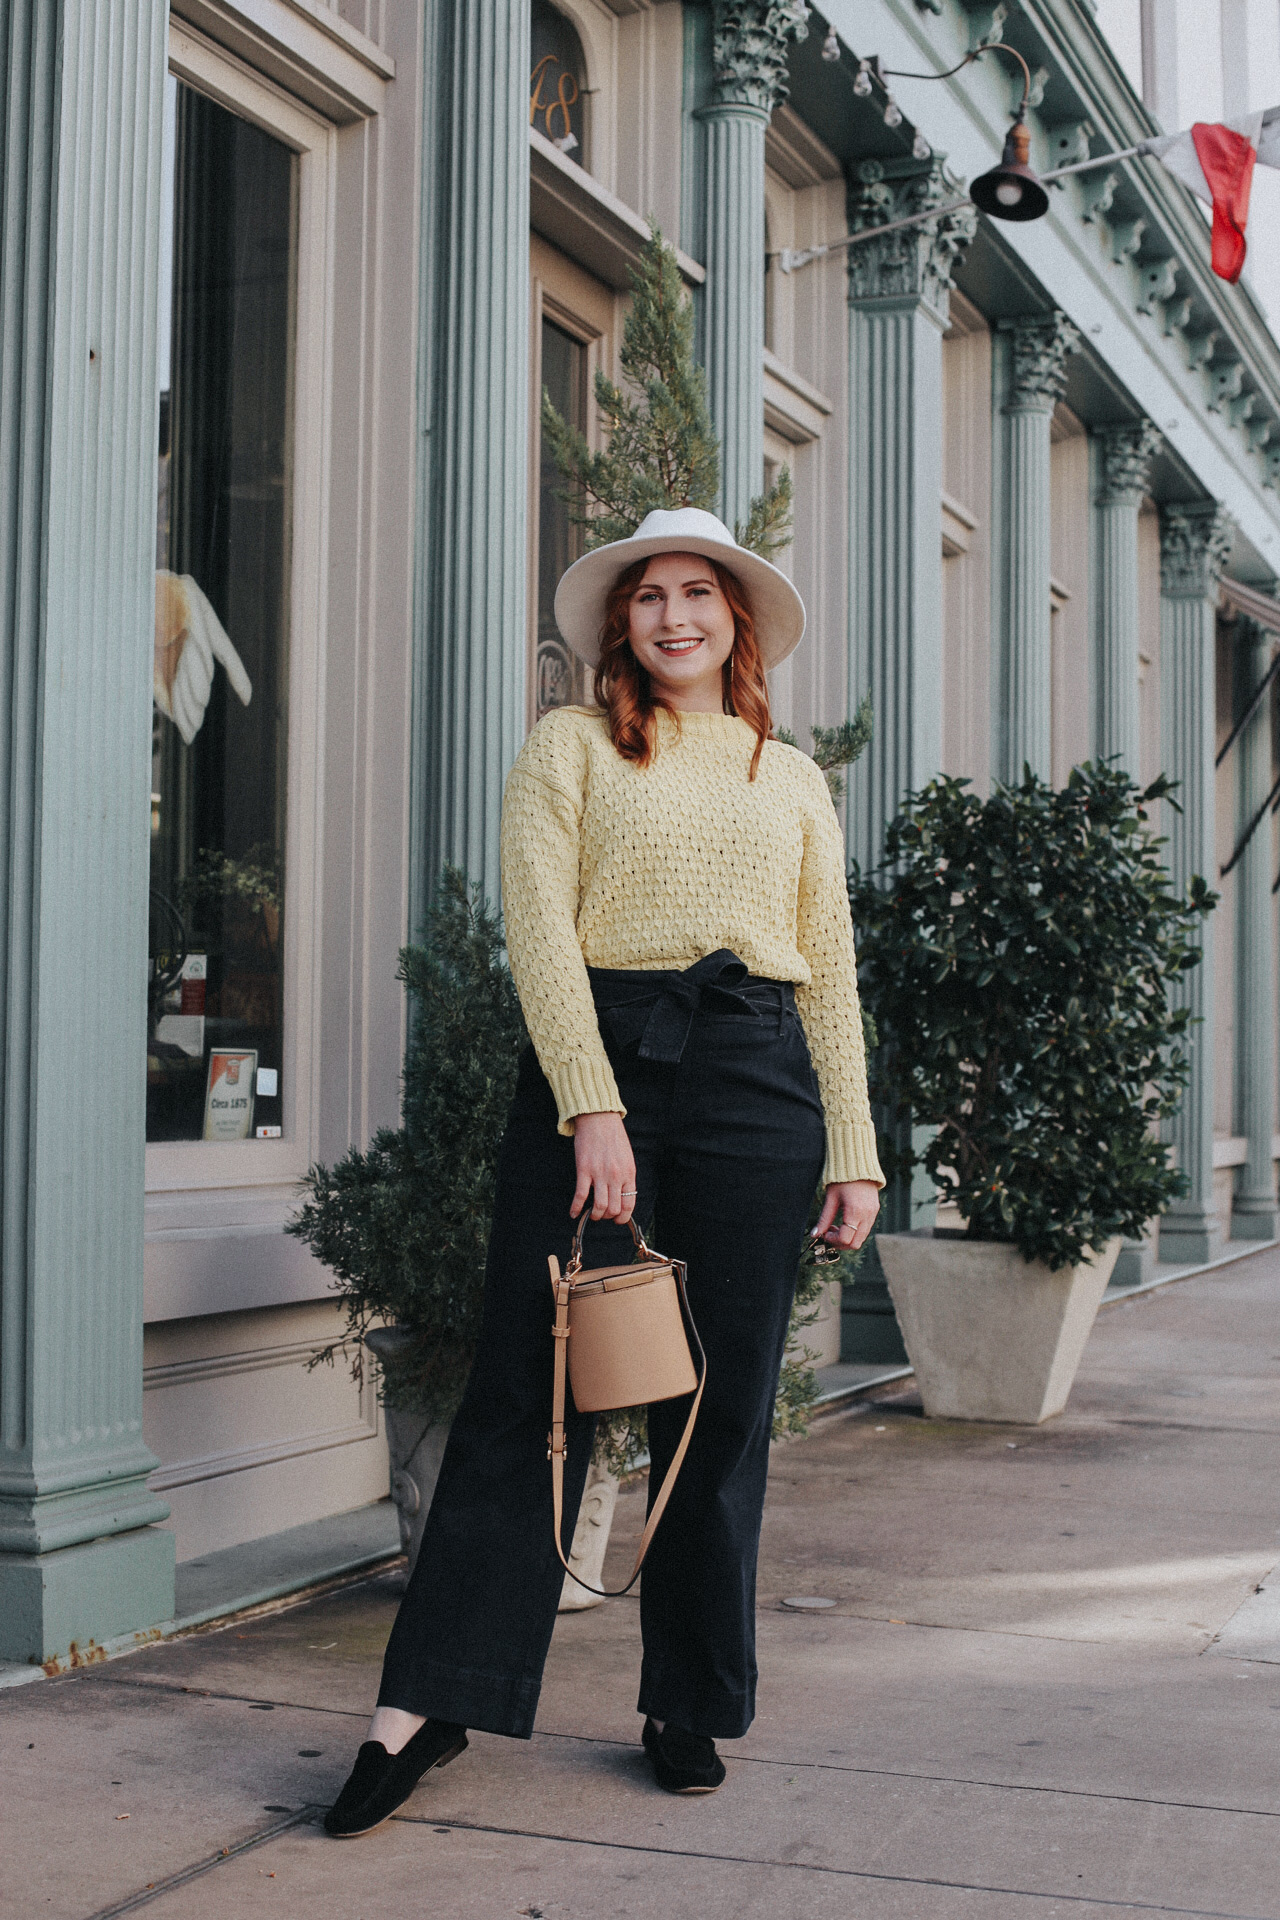 Paris Market - Savannah Travel Guide and Outfit Ideas for February